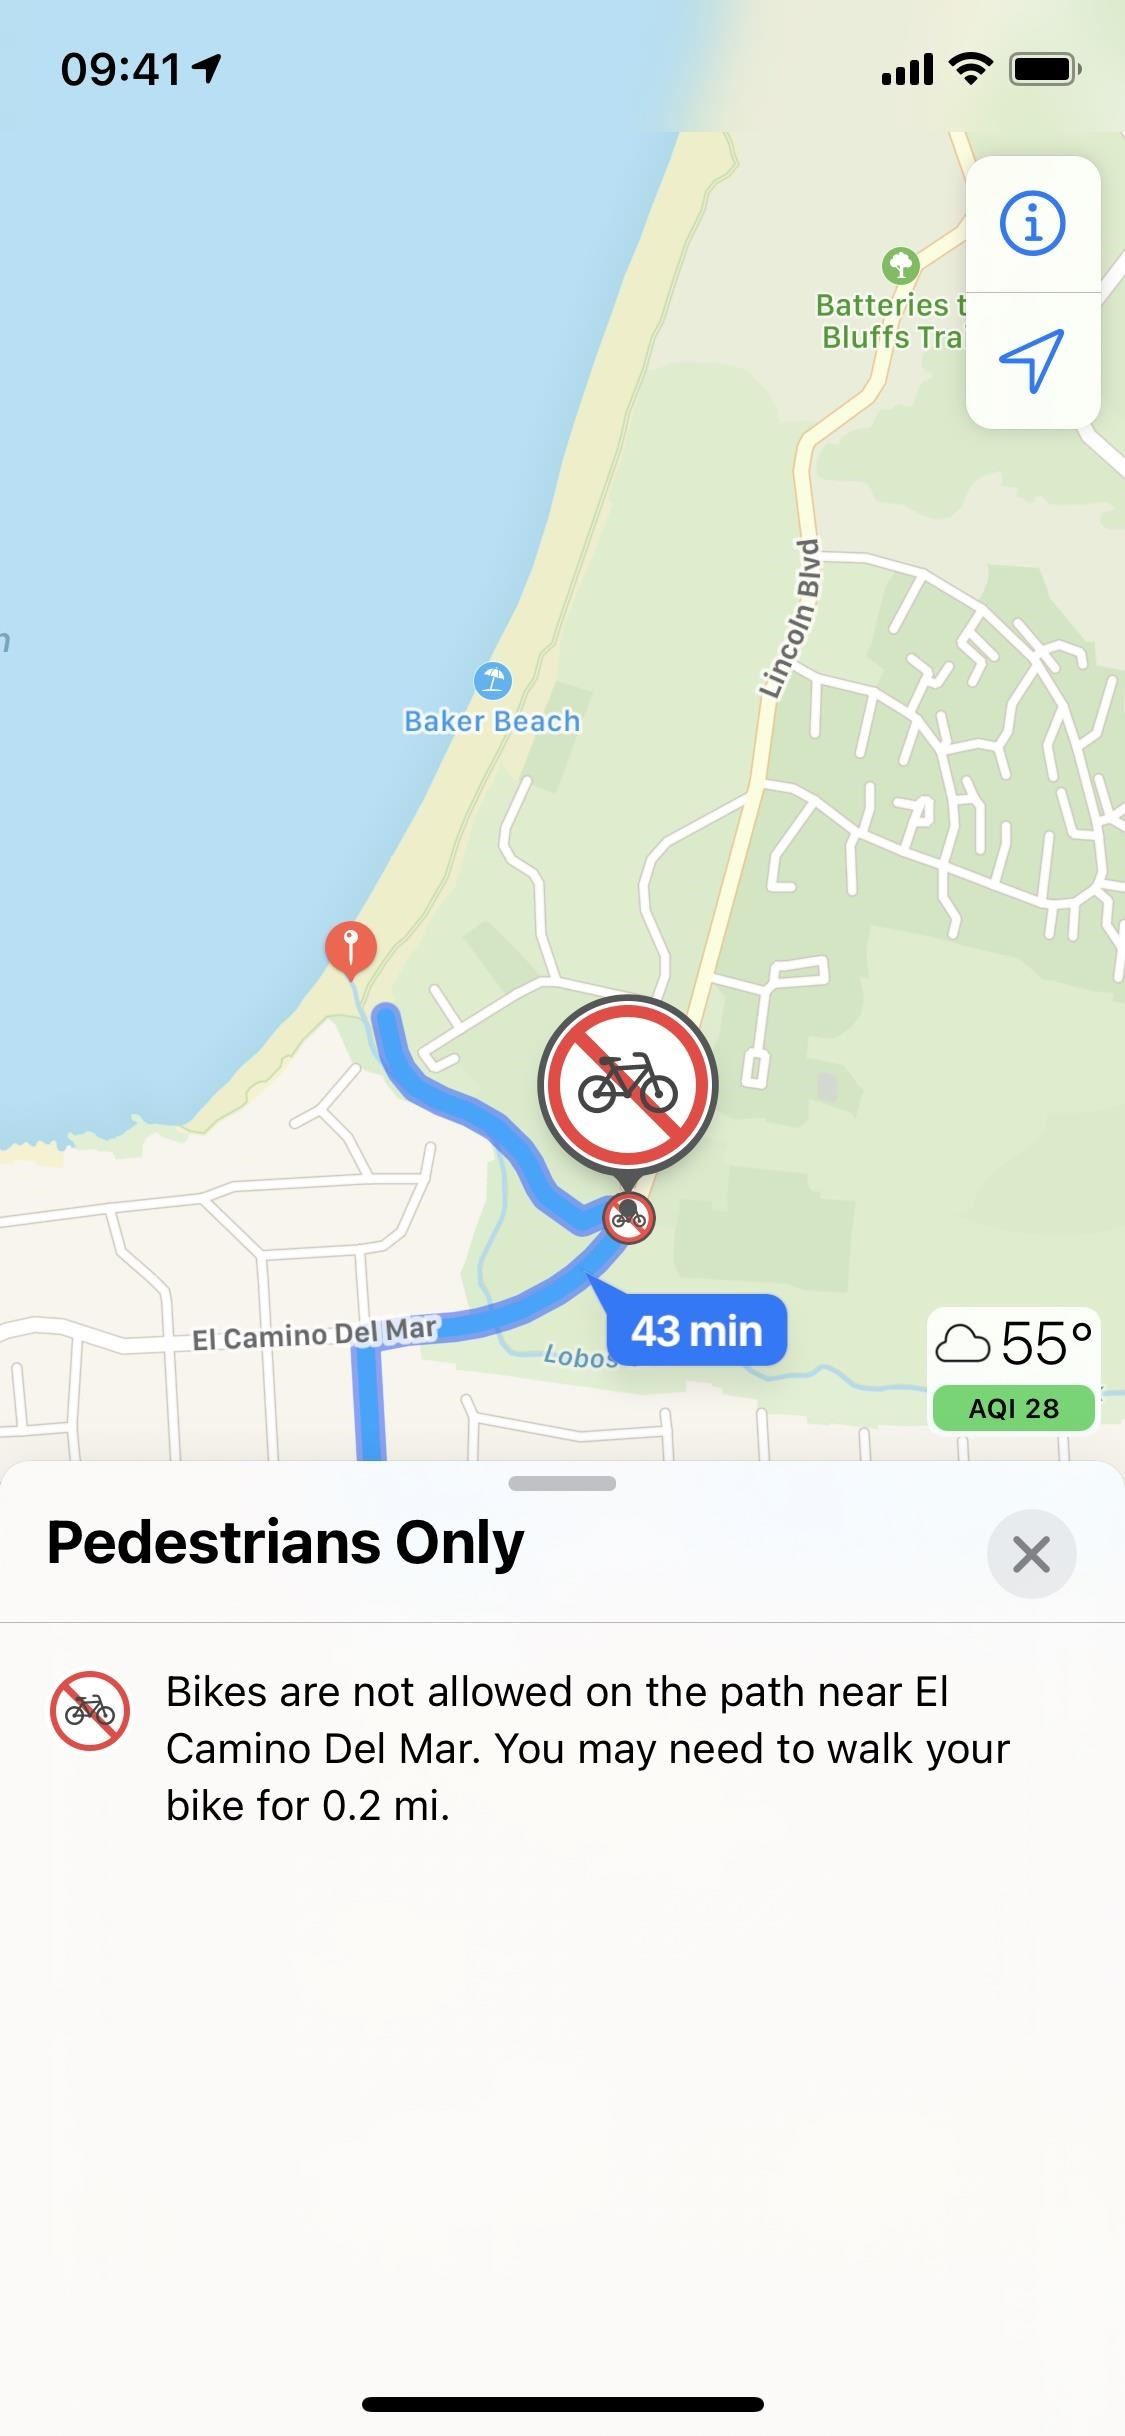 16 New Apple Maps Features for iPhone in iOS 14, Including Cycling Routes, New Widgets & City Guides